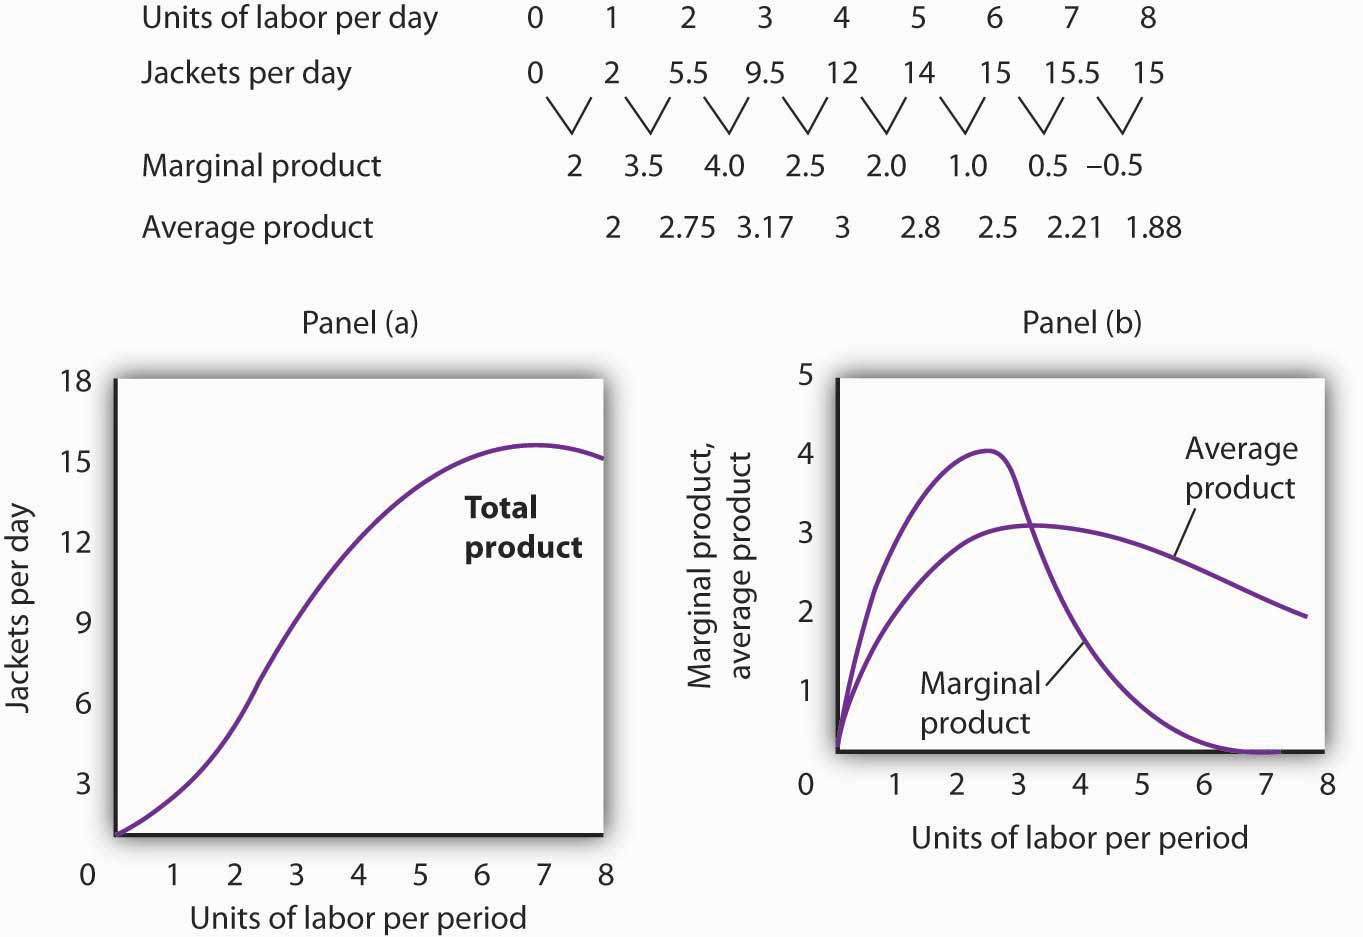 Units of labor per day, jackets per day, marginal product, average product